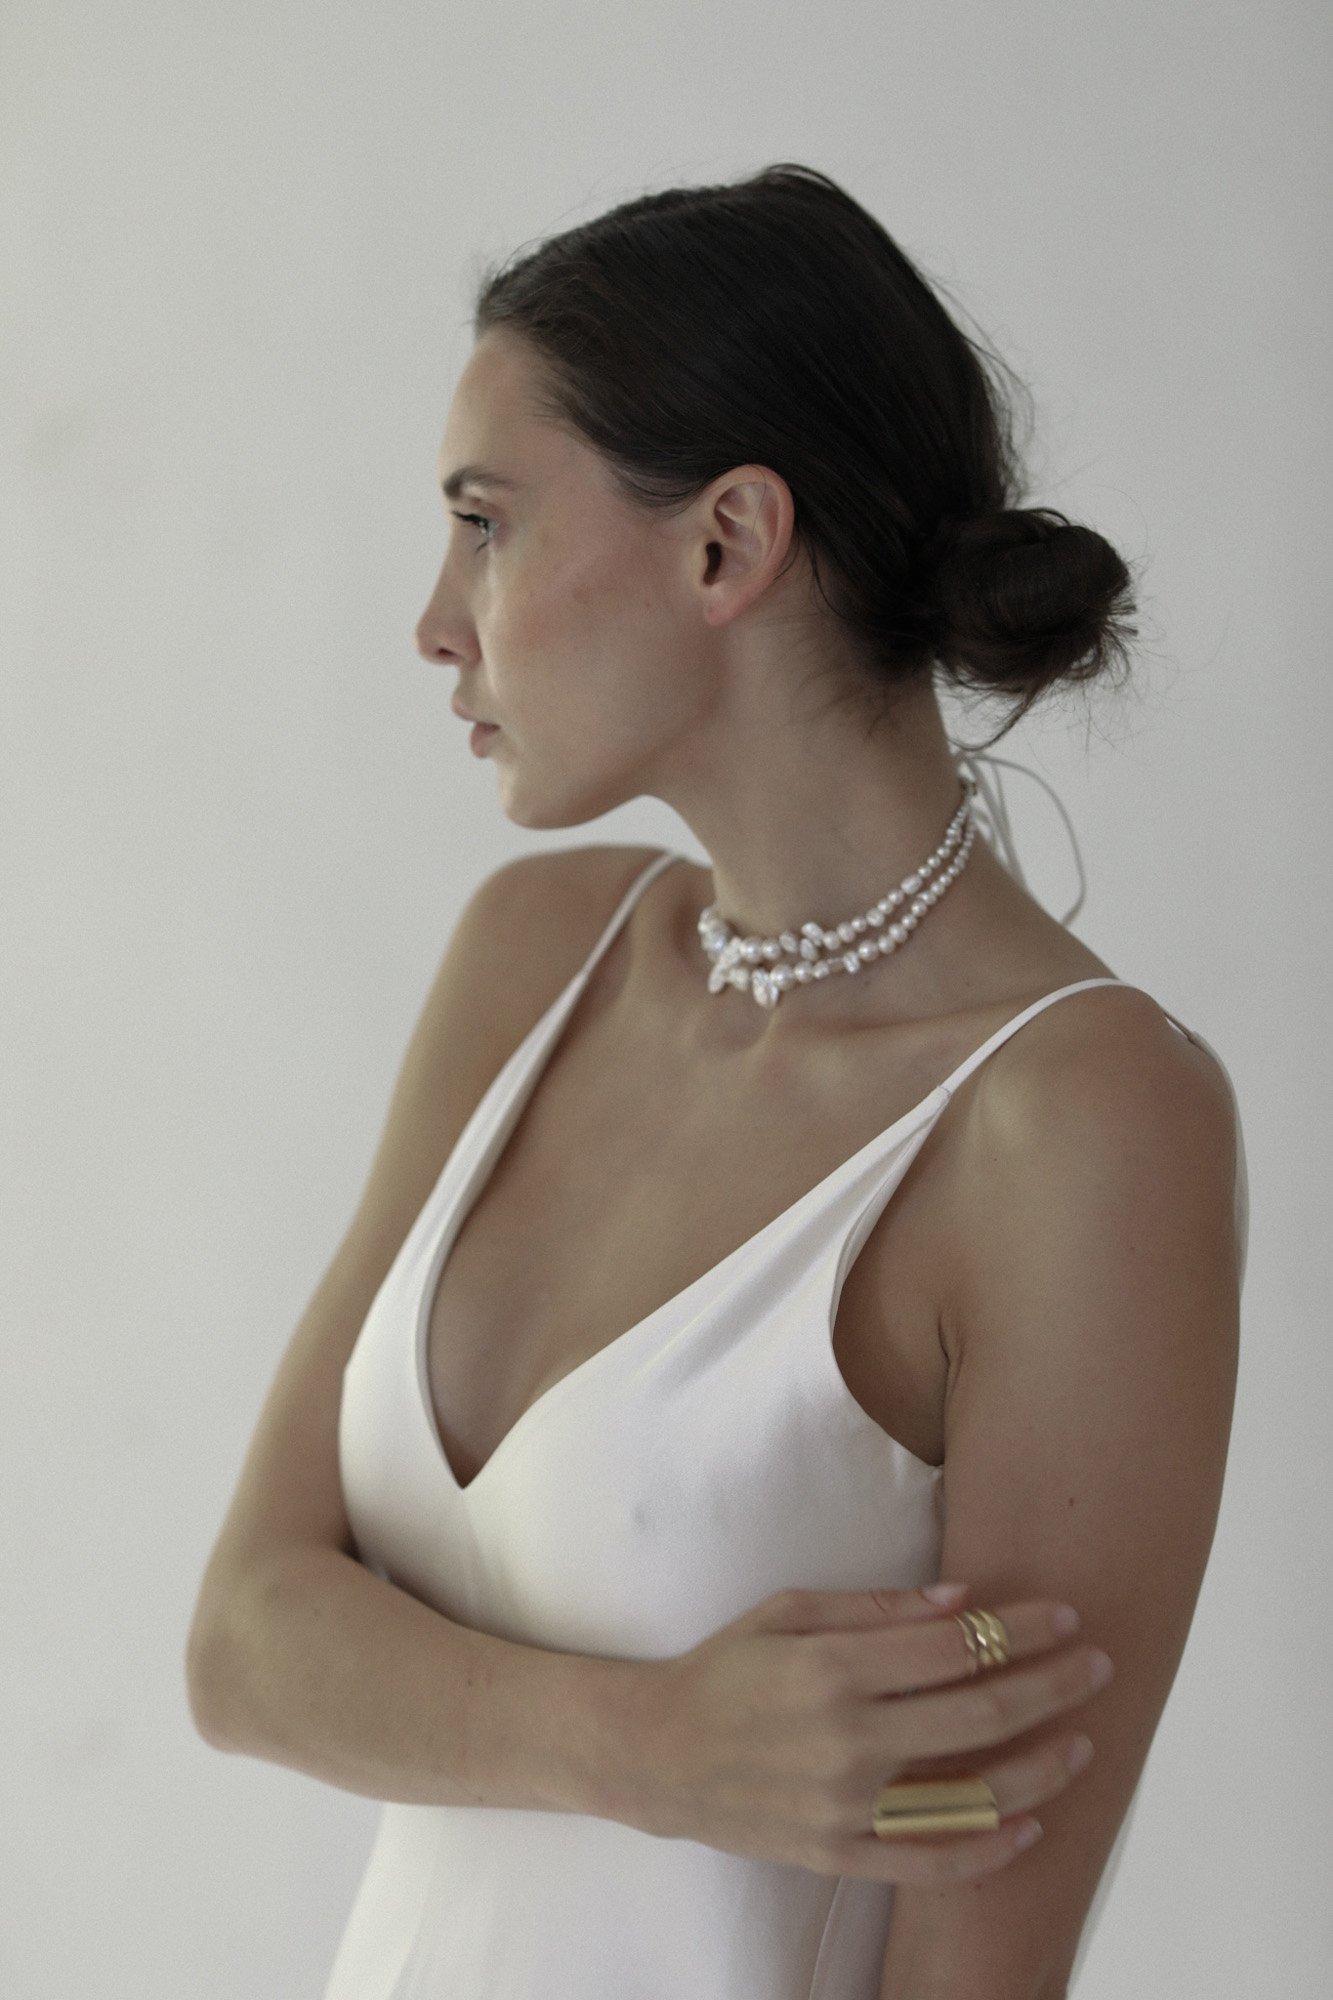 baroque-pearl-wavering-necklace-by-abellie-bridal-accessories-40.jpg